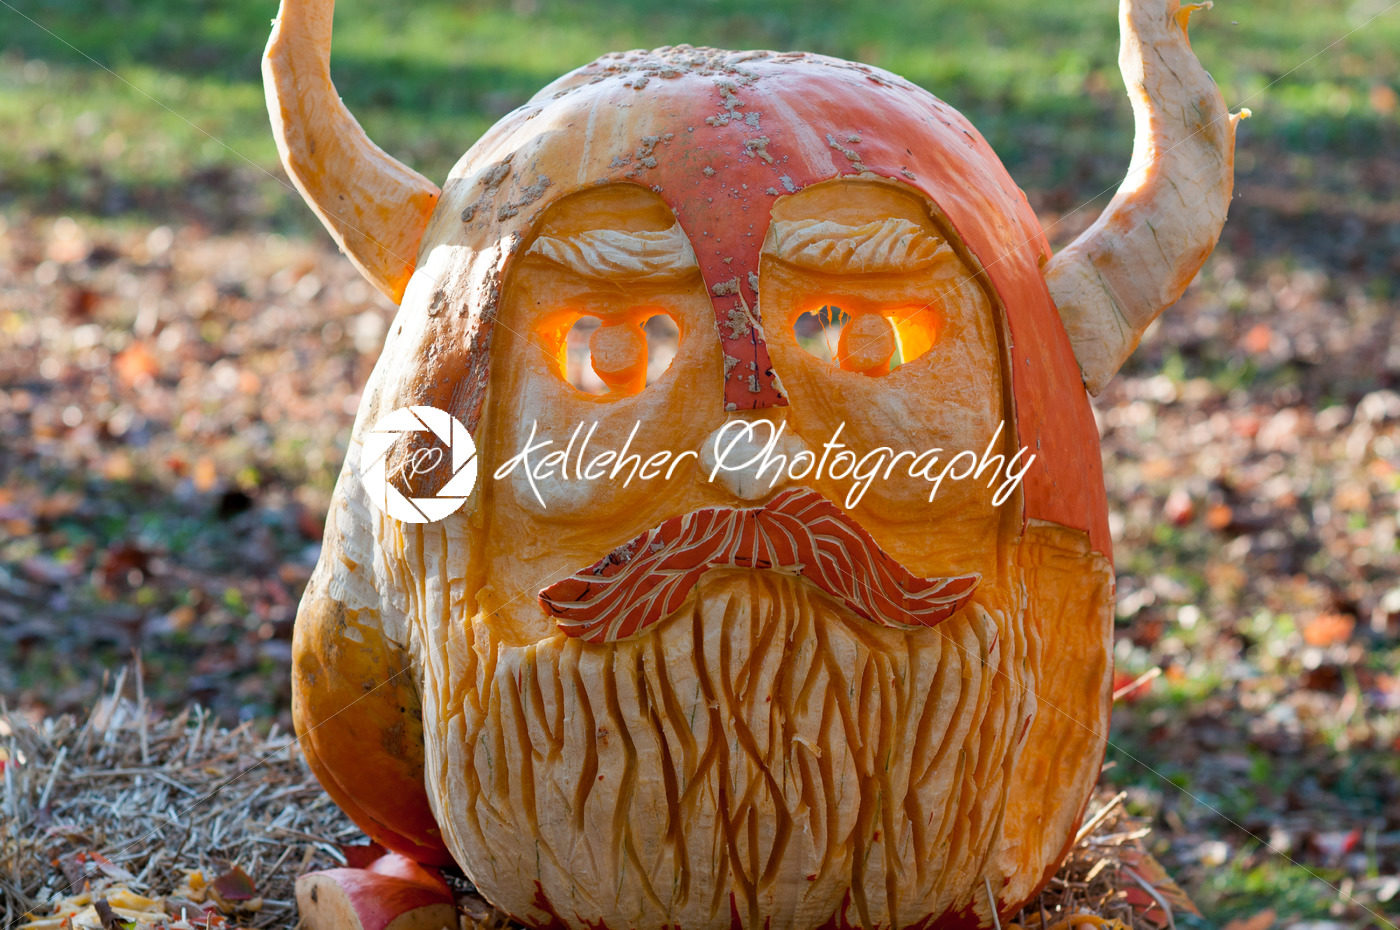 CHADDS FORD, PA – OCTOBER 26: Viking Pumpkin at The Great Pumpkin Carve carving contest on October 26, 2013 - Kelleher Photography Store